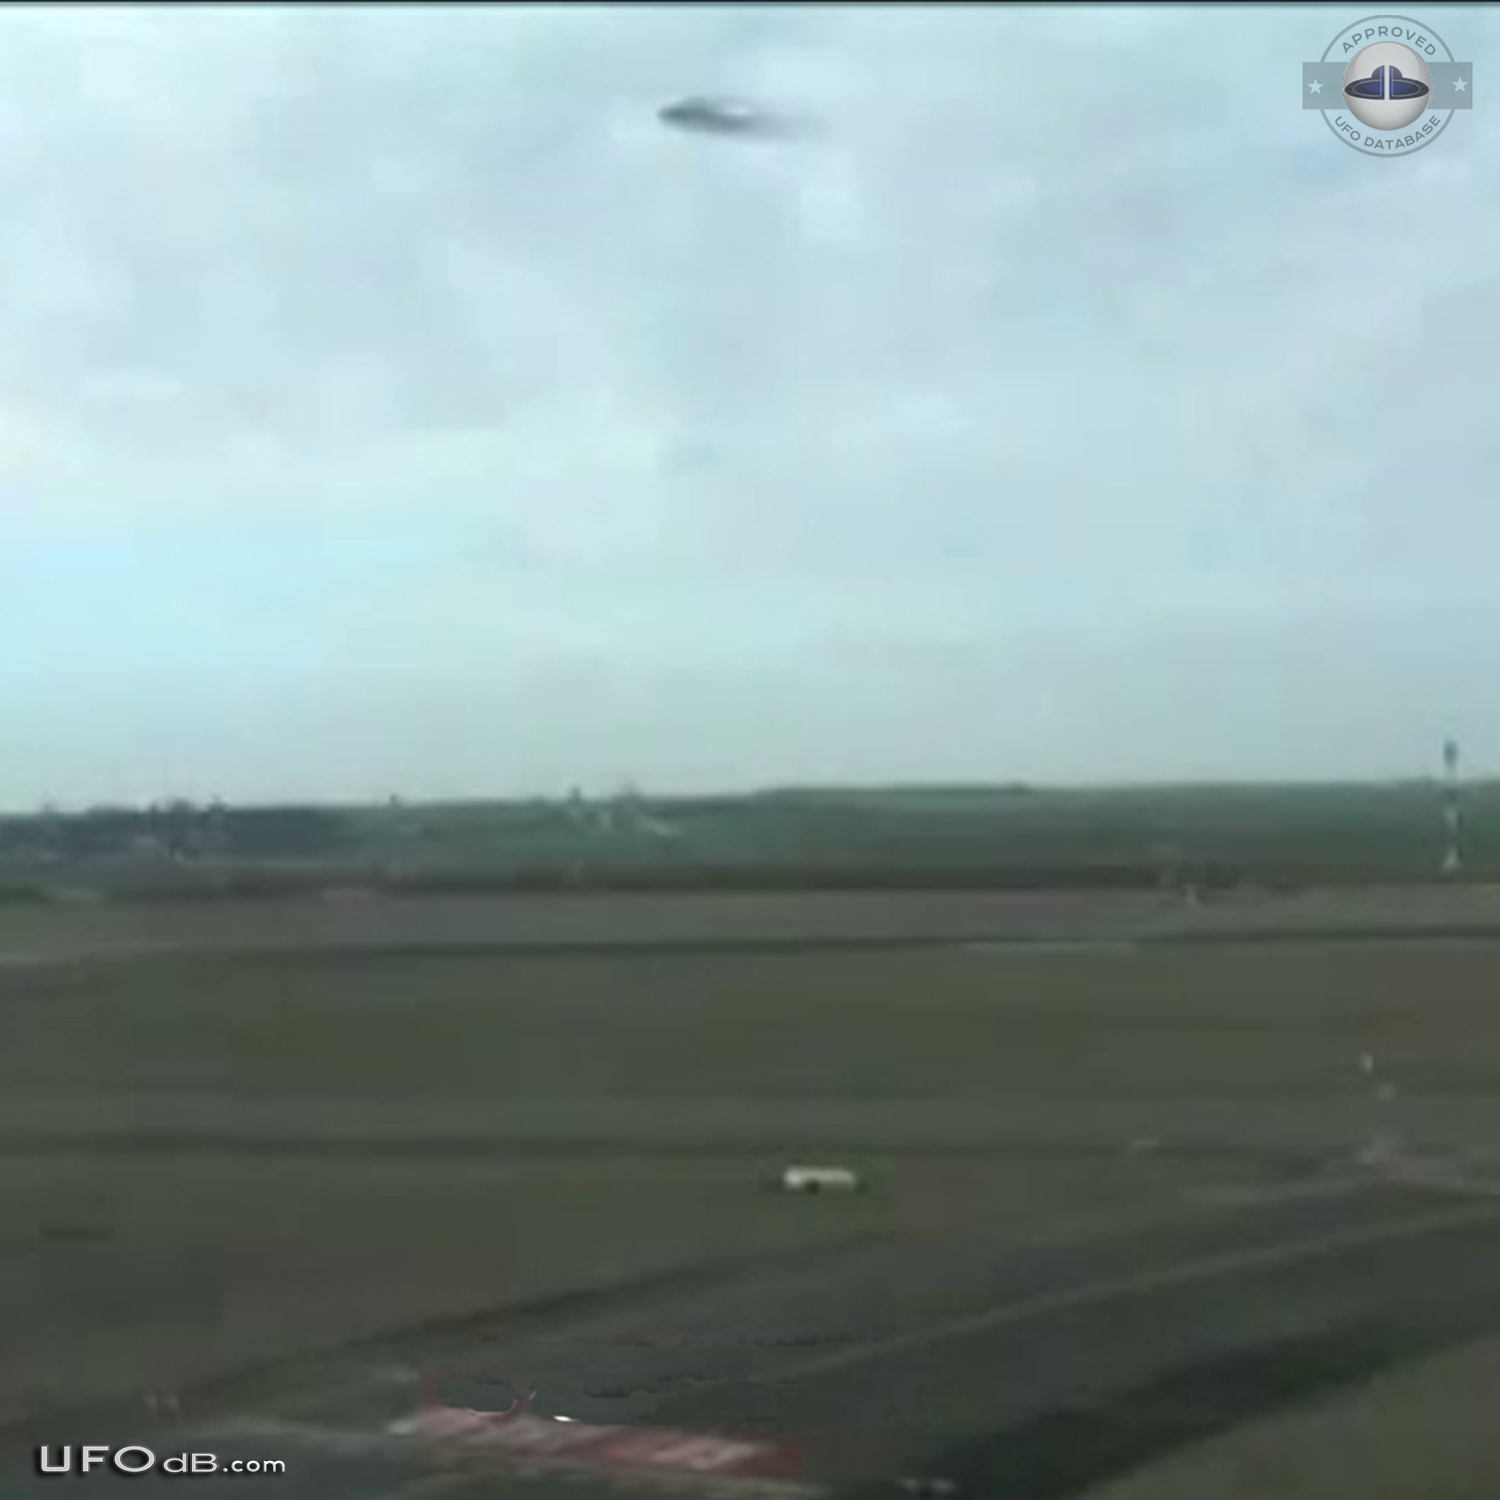 UFO picture from plane taking off Paris Charles de Gaulle airport 2013 UFO Picture #541-4